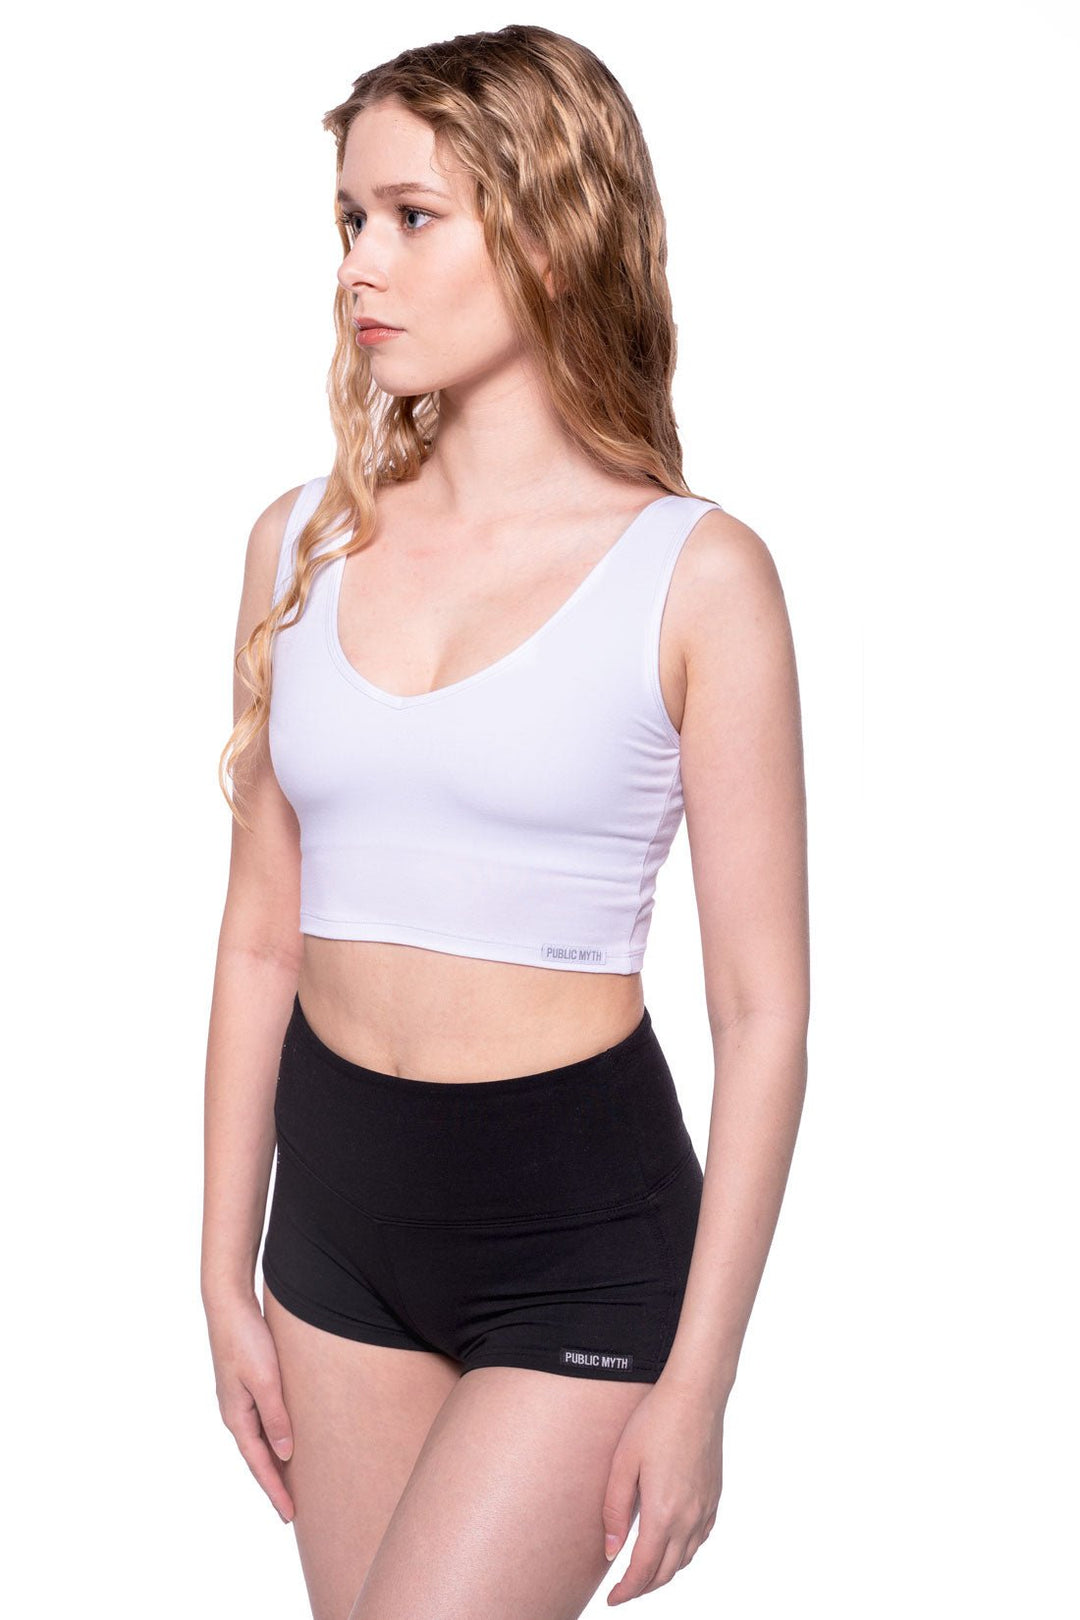 White V neck sports bra and black booty short outfit